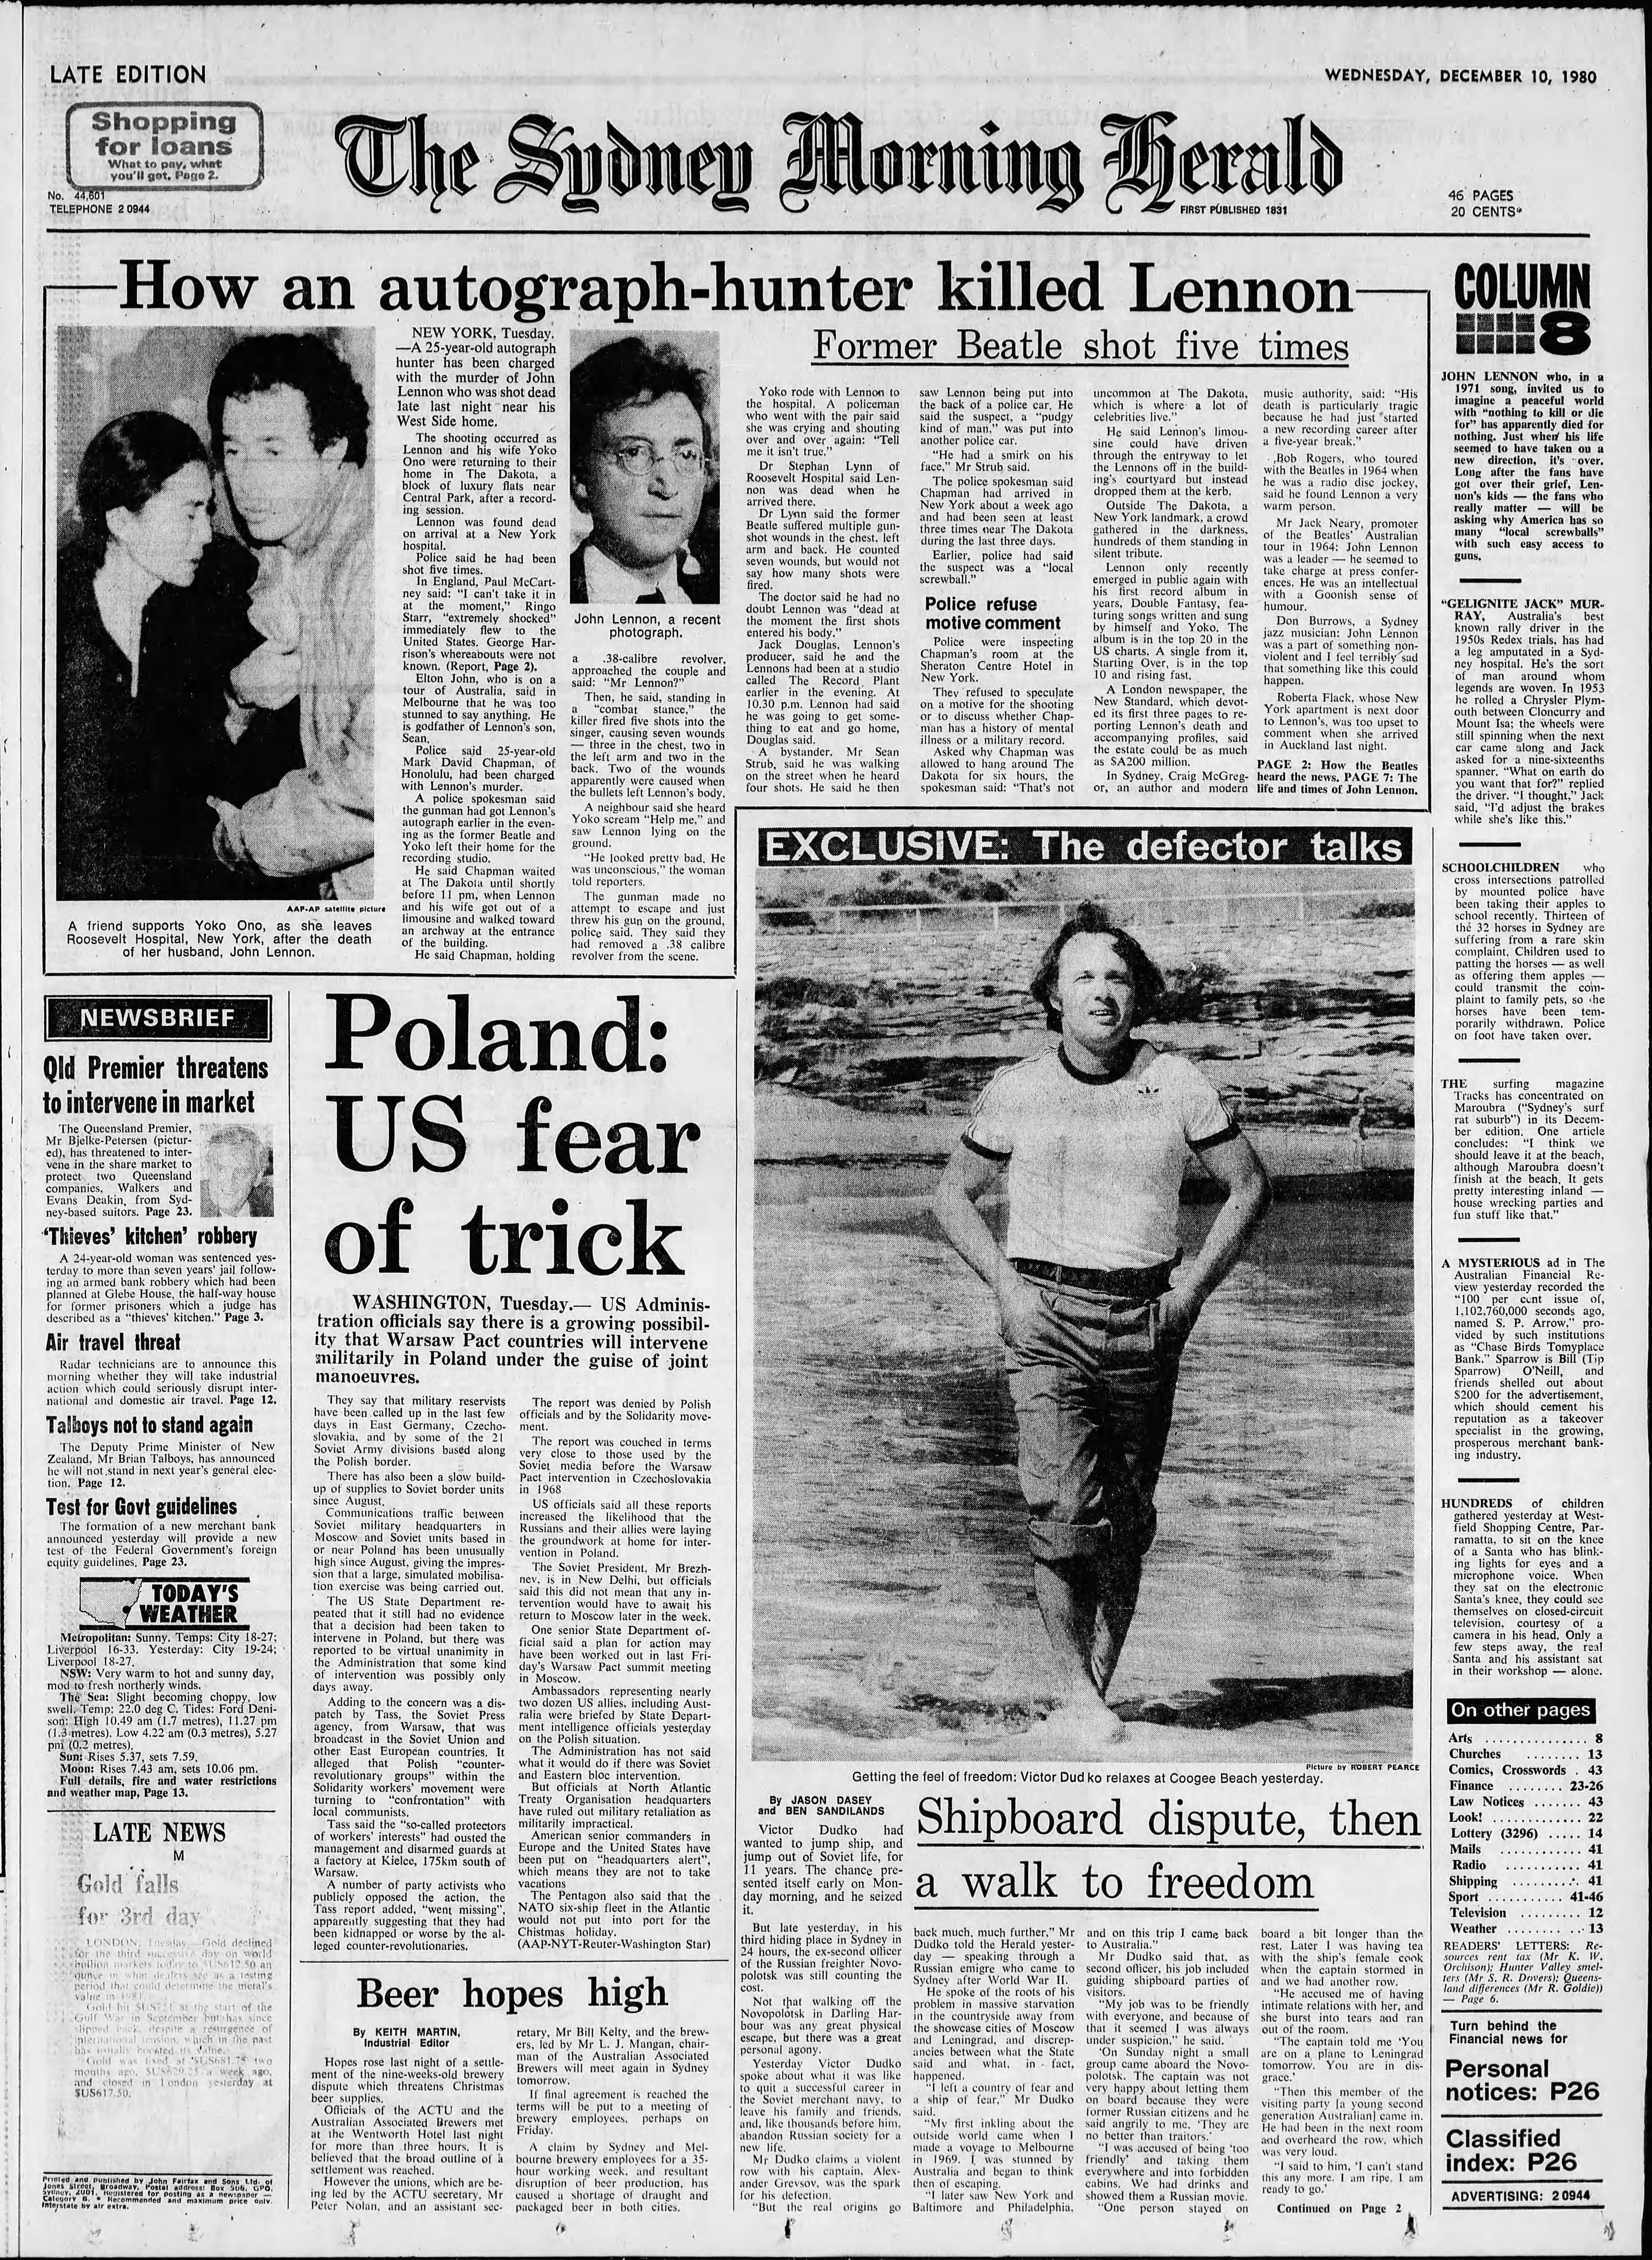 News of the John Lennon murder dominates the front page of The Sydney Morning Herald on December 10th, 1980